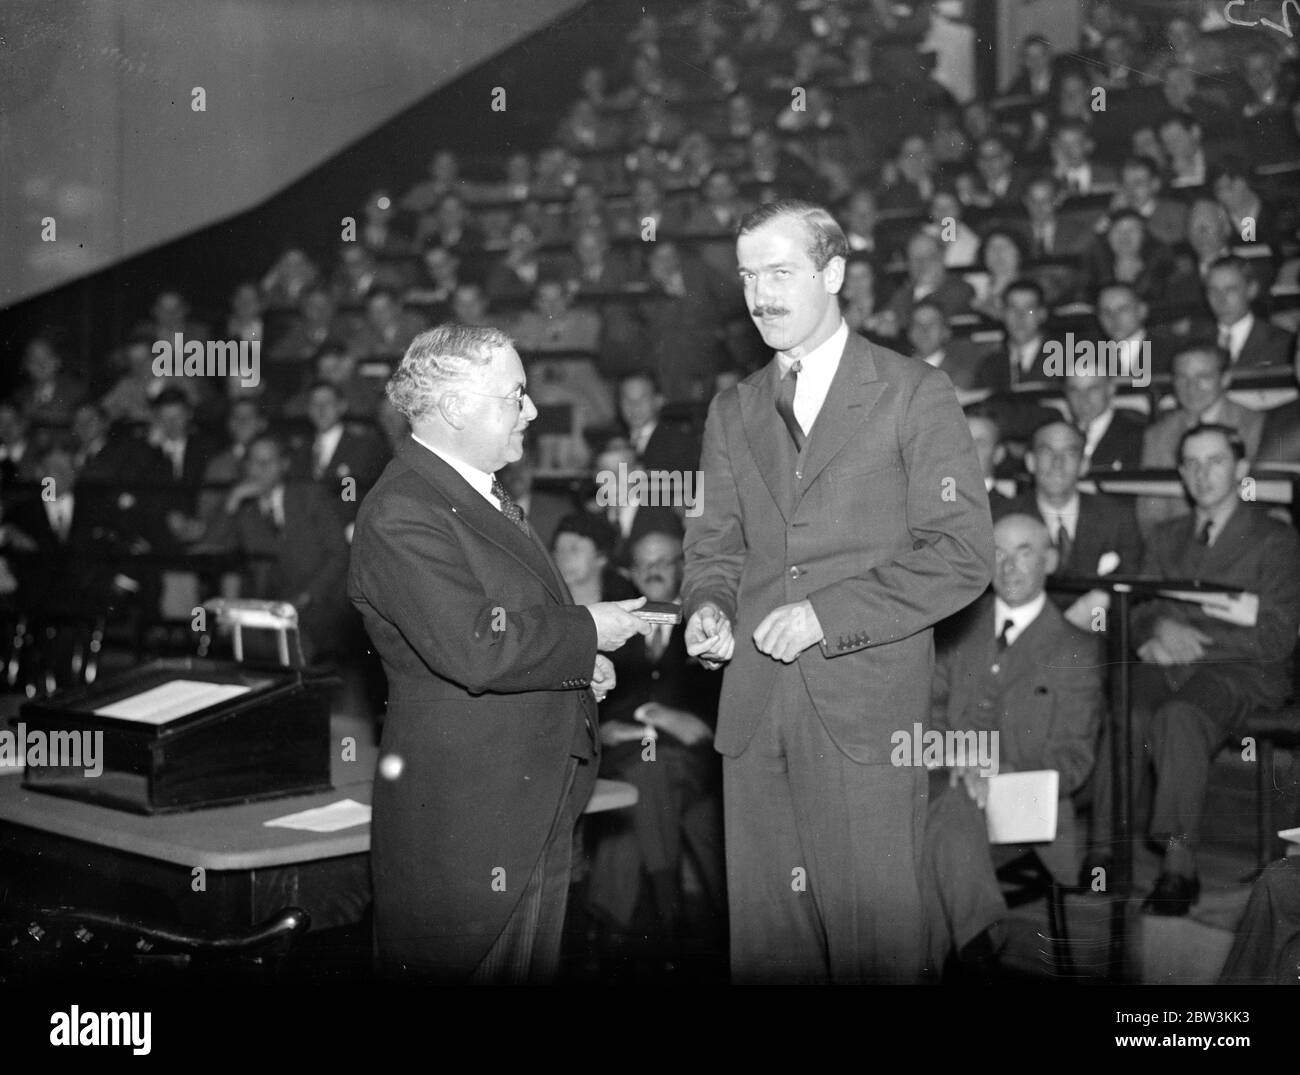 Minister of Health presents prizes at Guy 's Hospital Medical School , London . Sir Kingsley Wood presenting a medal for clinical surgery to P W Clarkson . 8 October 1935 Stock Photo